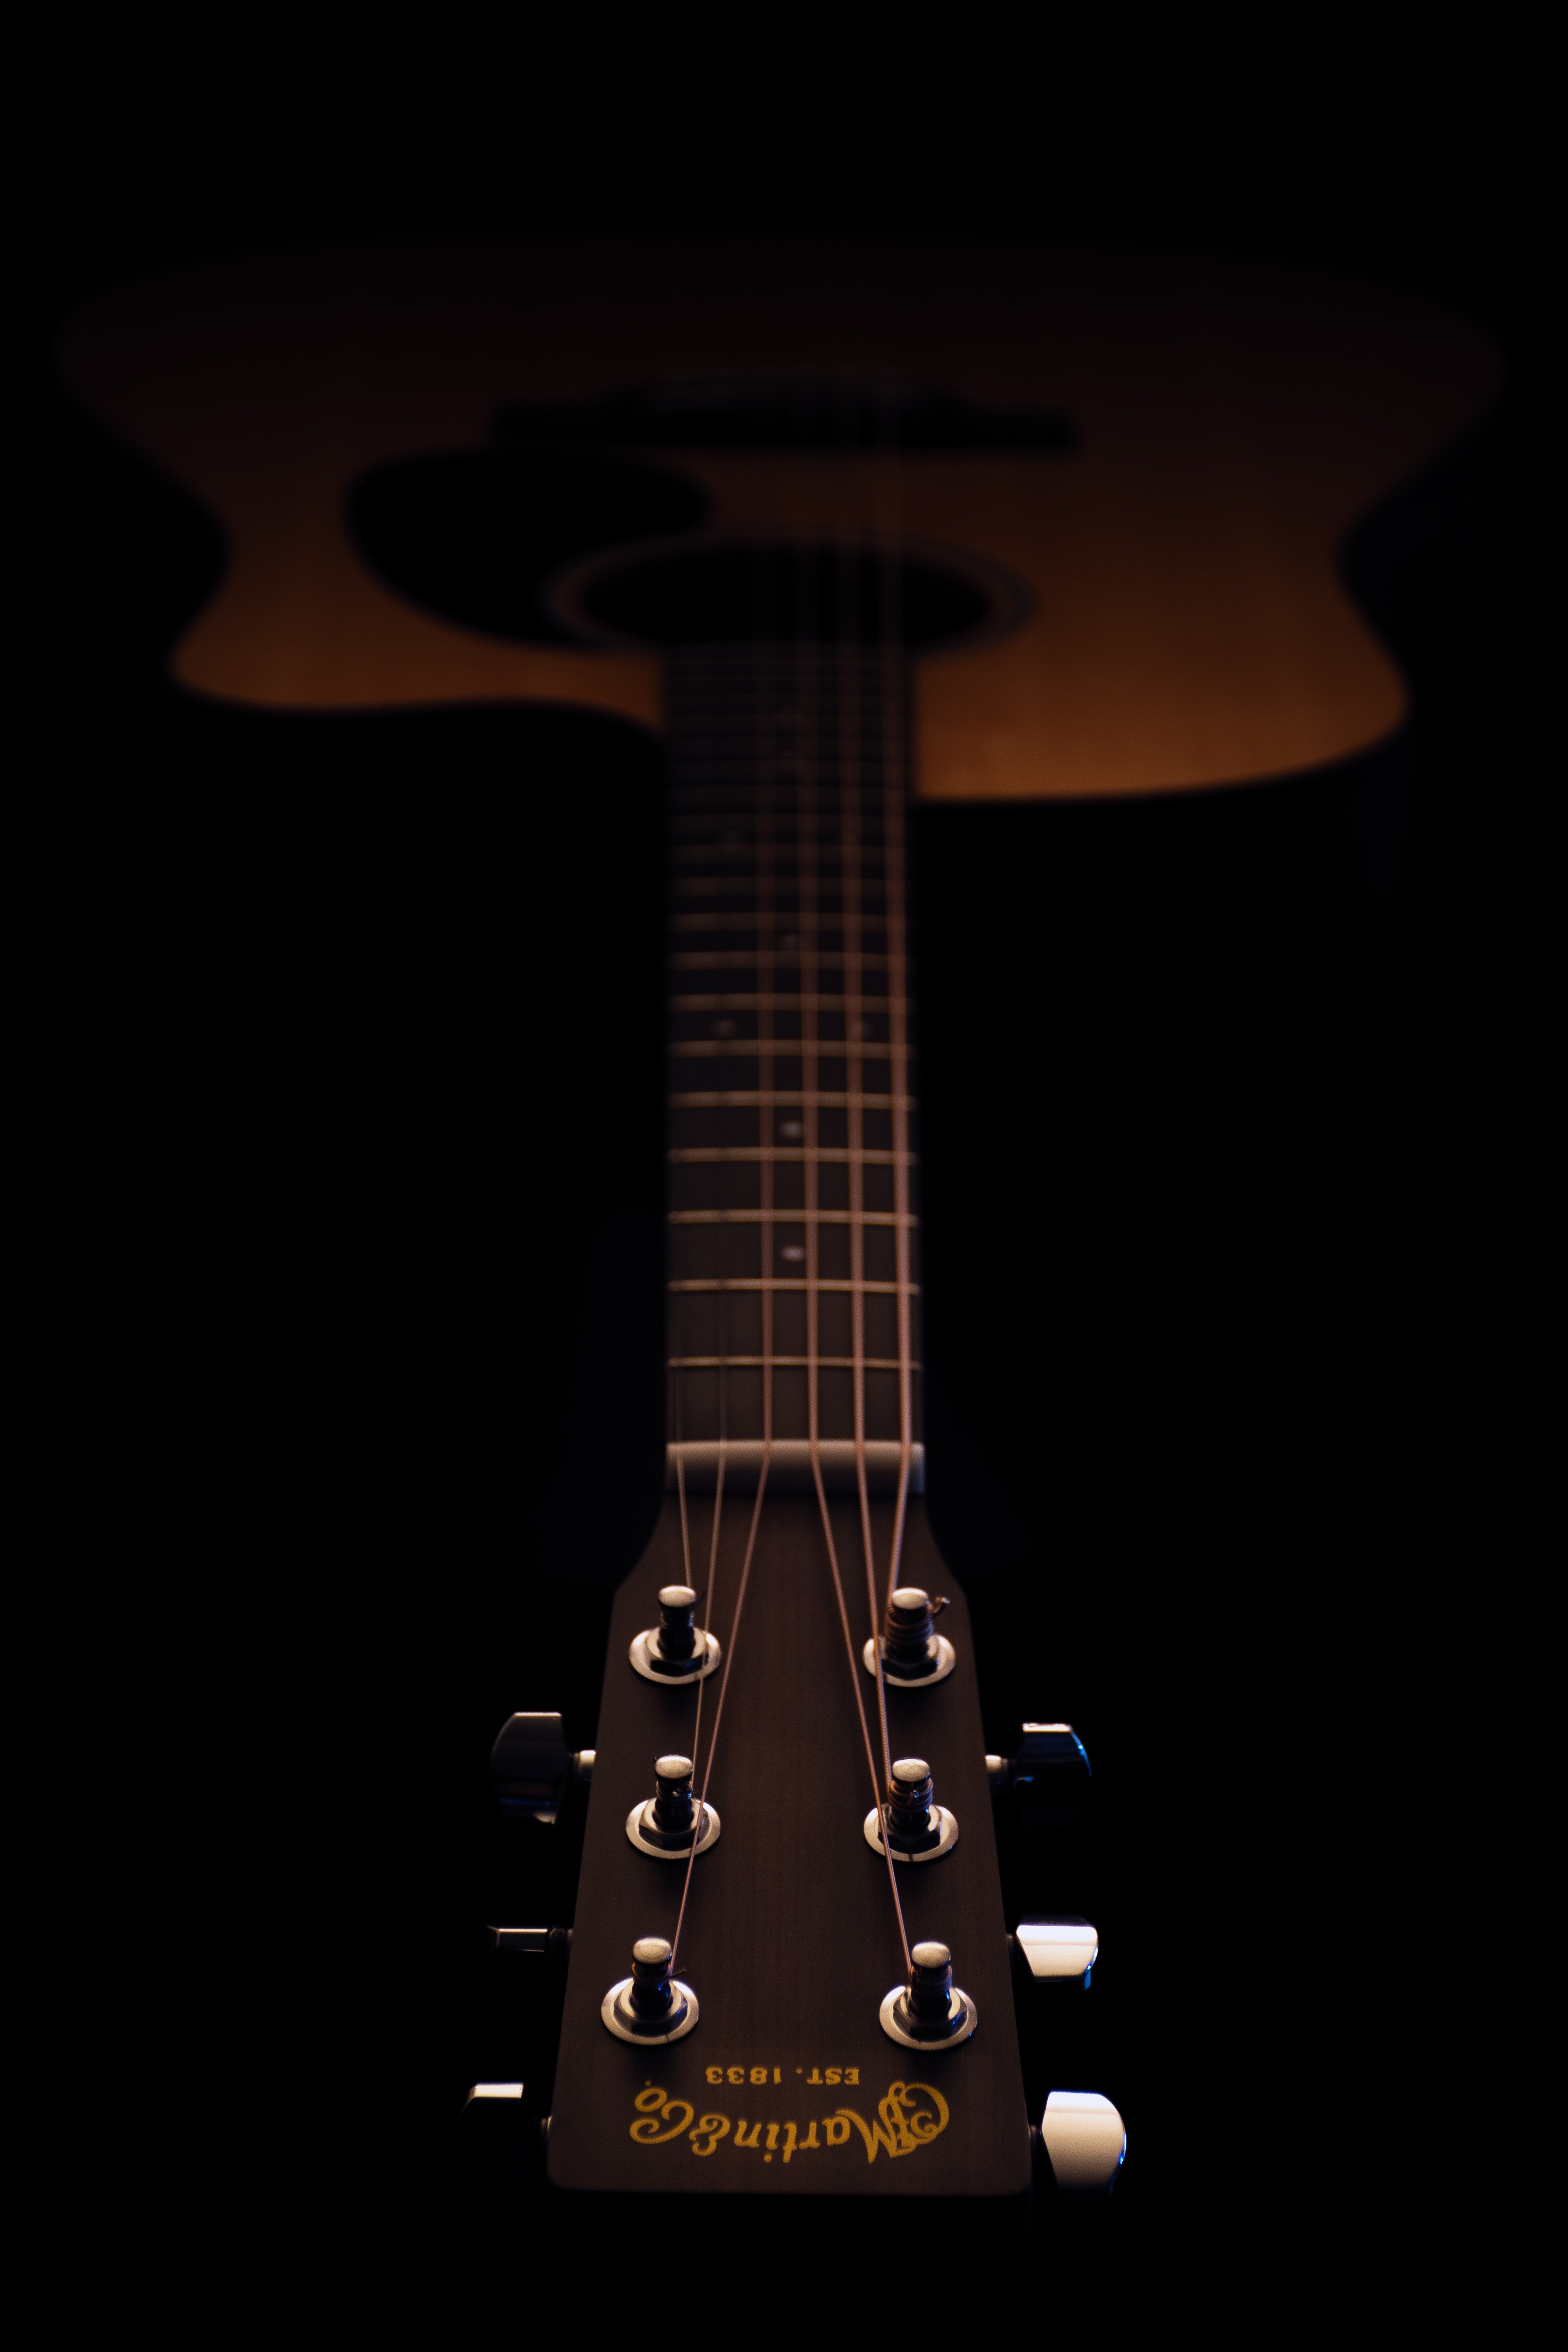 Best Free Guitar & Image · 100% Royalty Free HD Downloads